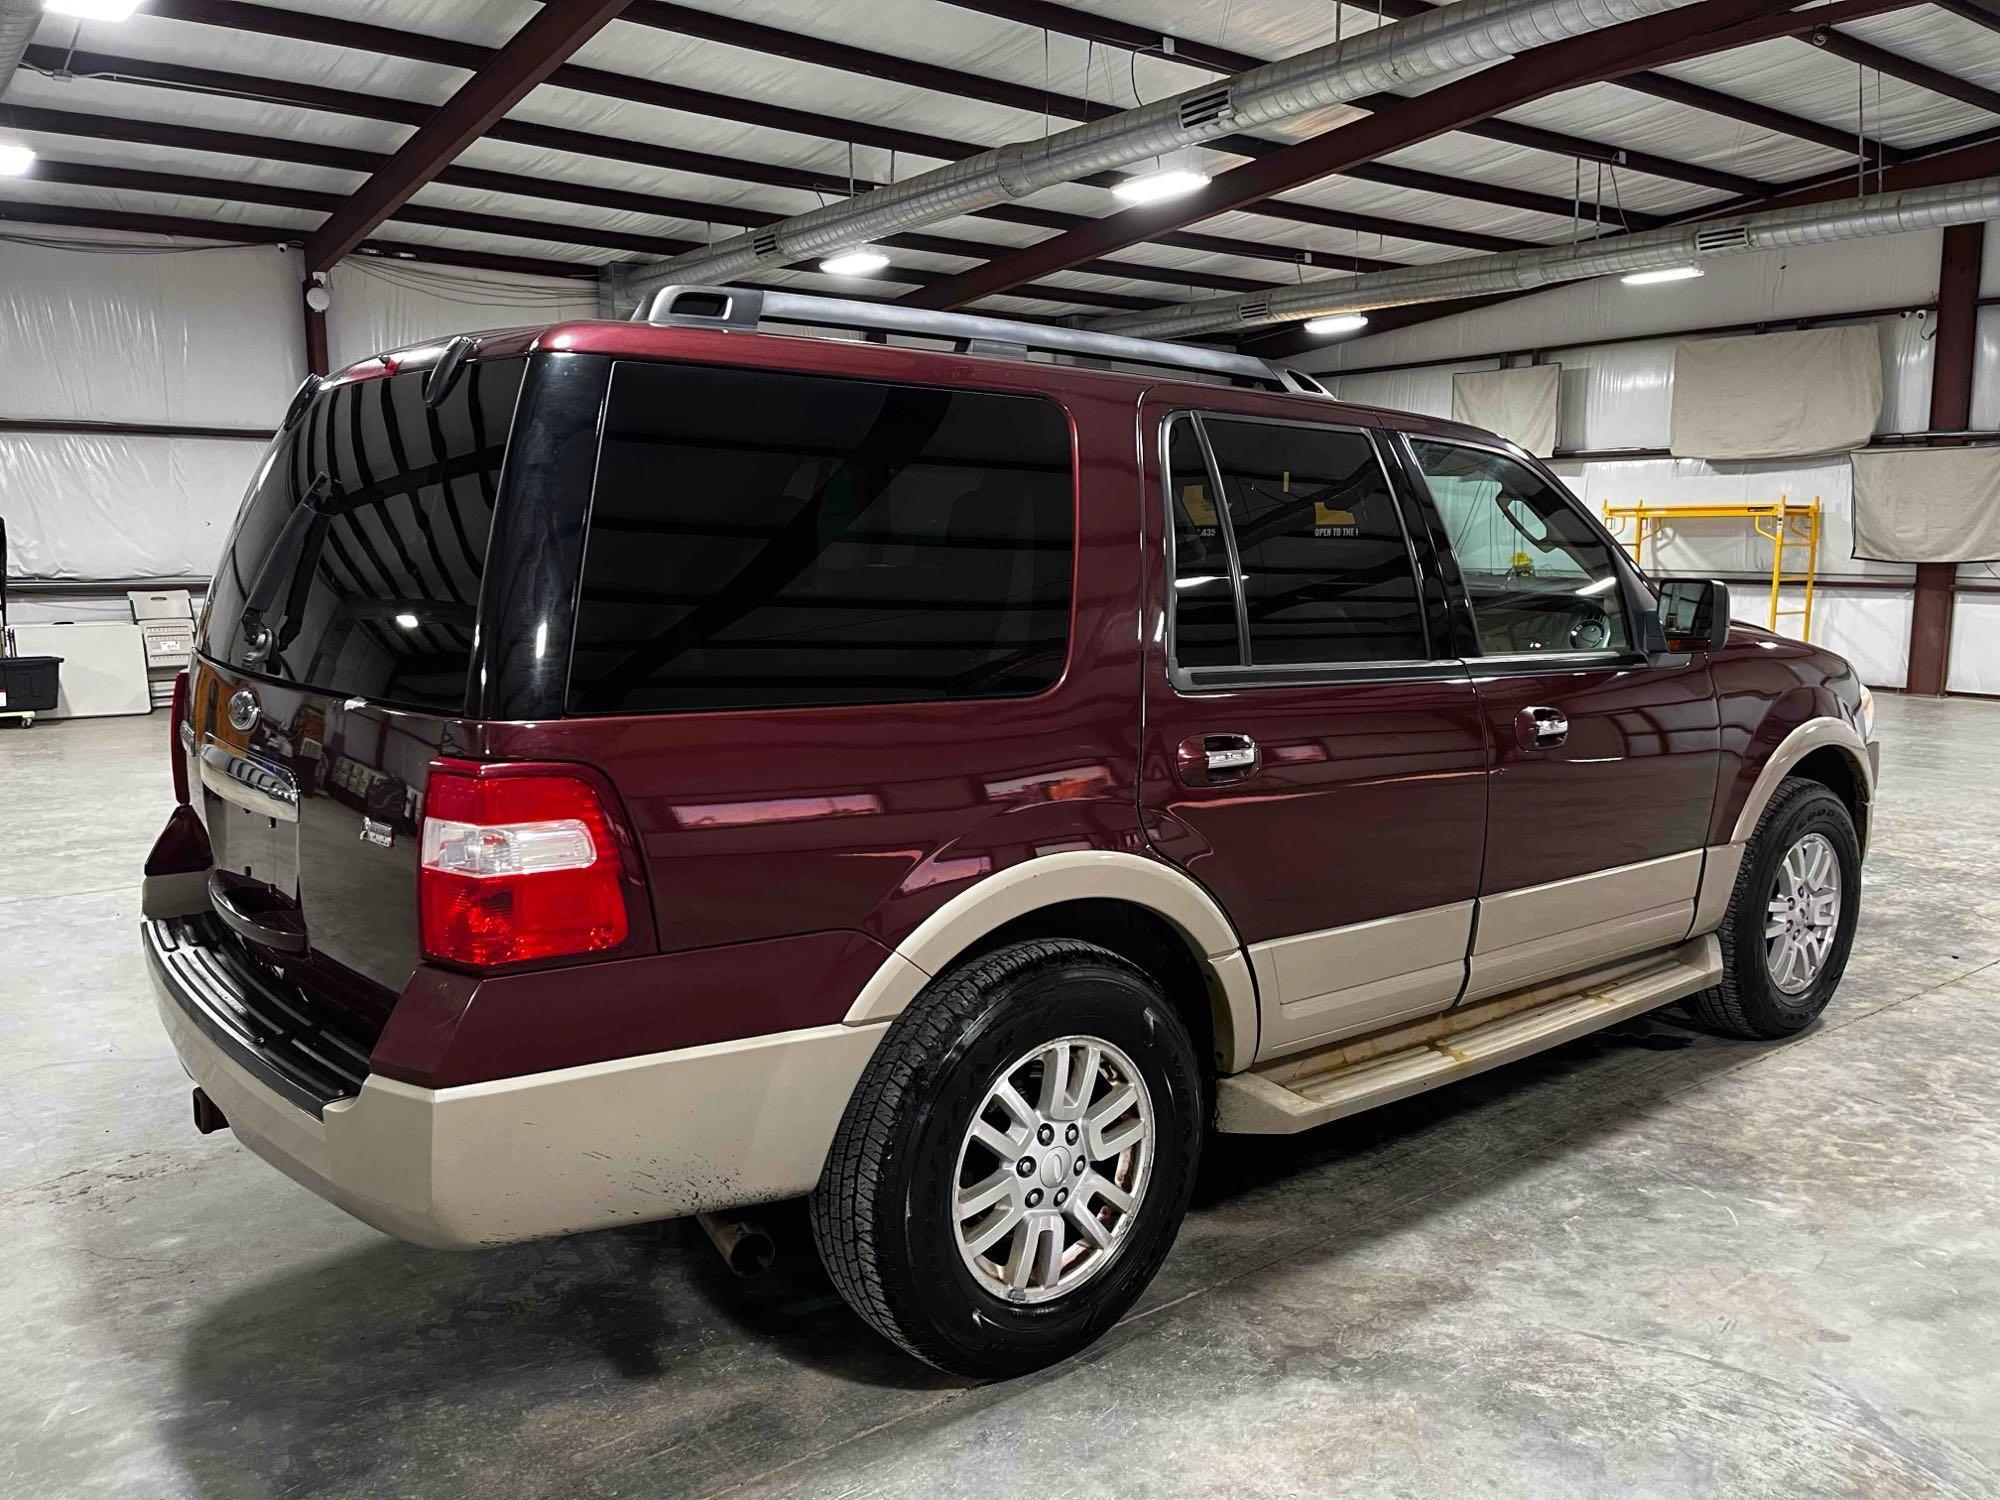 2009 Ford Expedition SUV